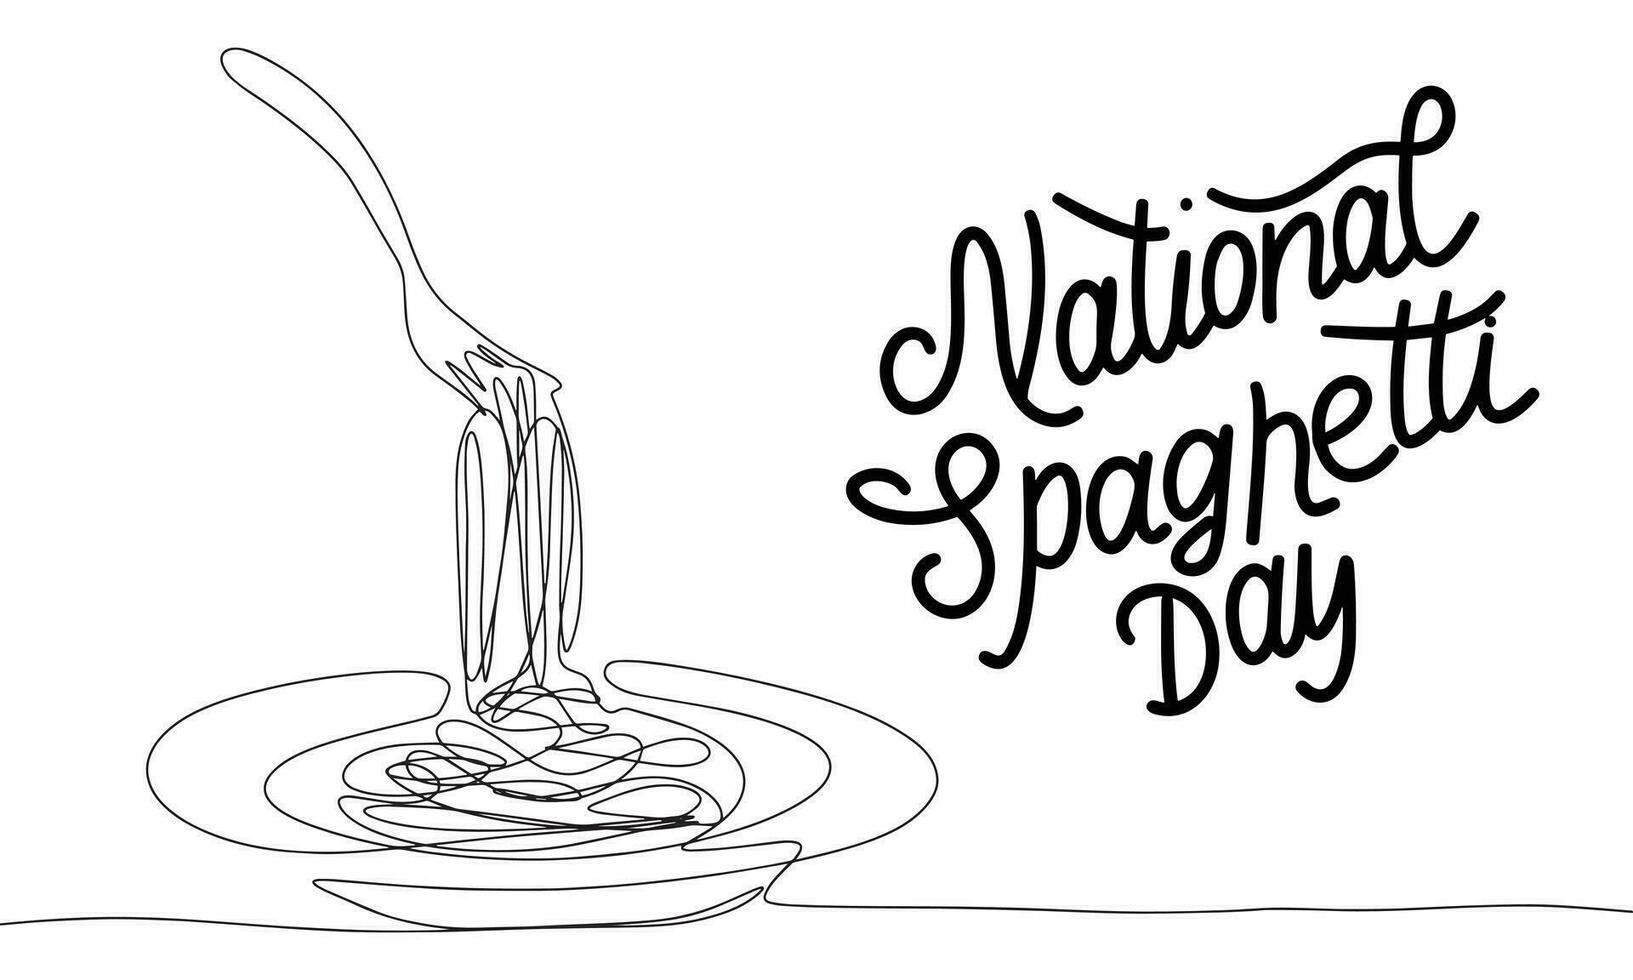 National Spaghetti Day banner. Handwriting lettering National Spaghetti Day text and line art fork with spaghetti in plate. Hand drawn vector art.